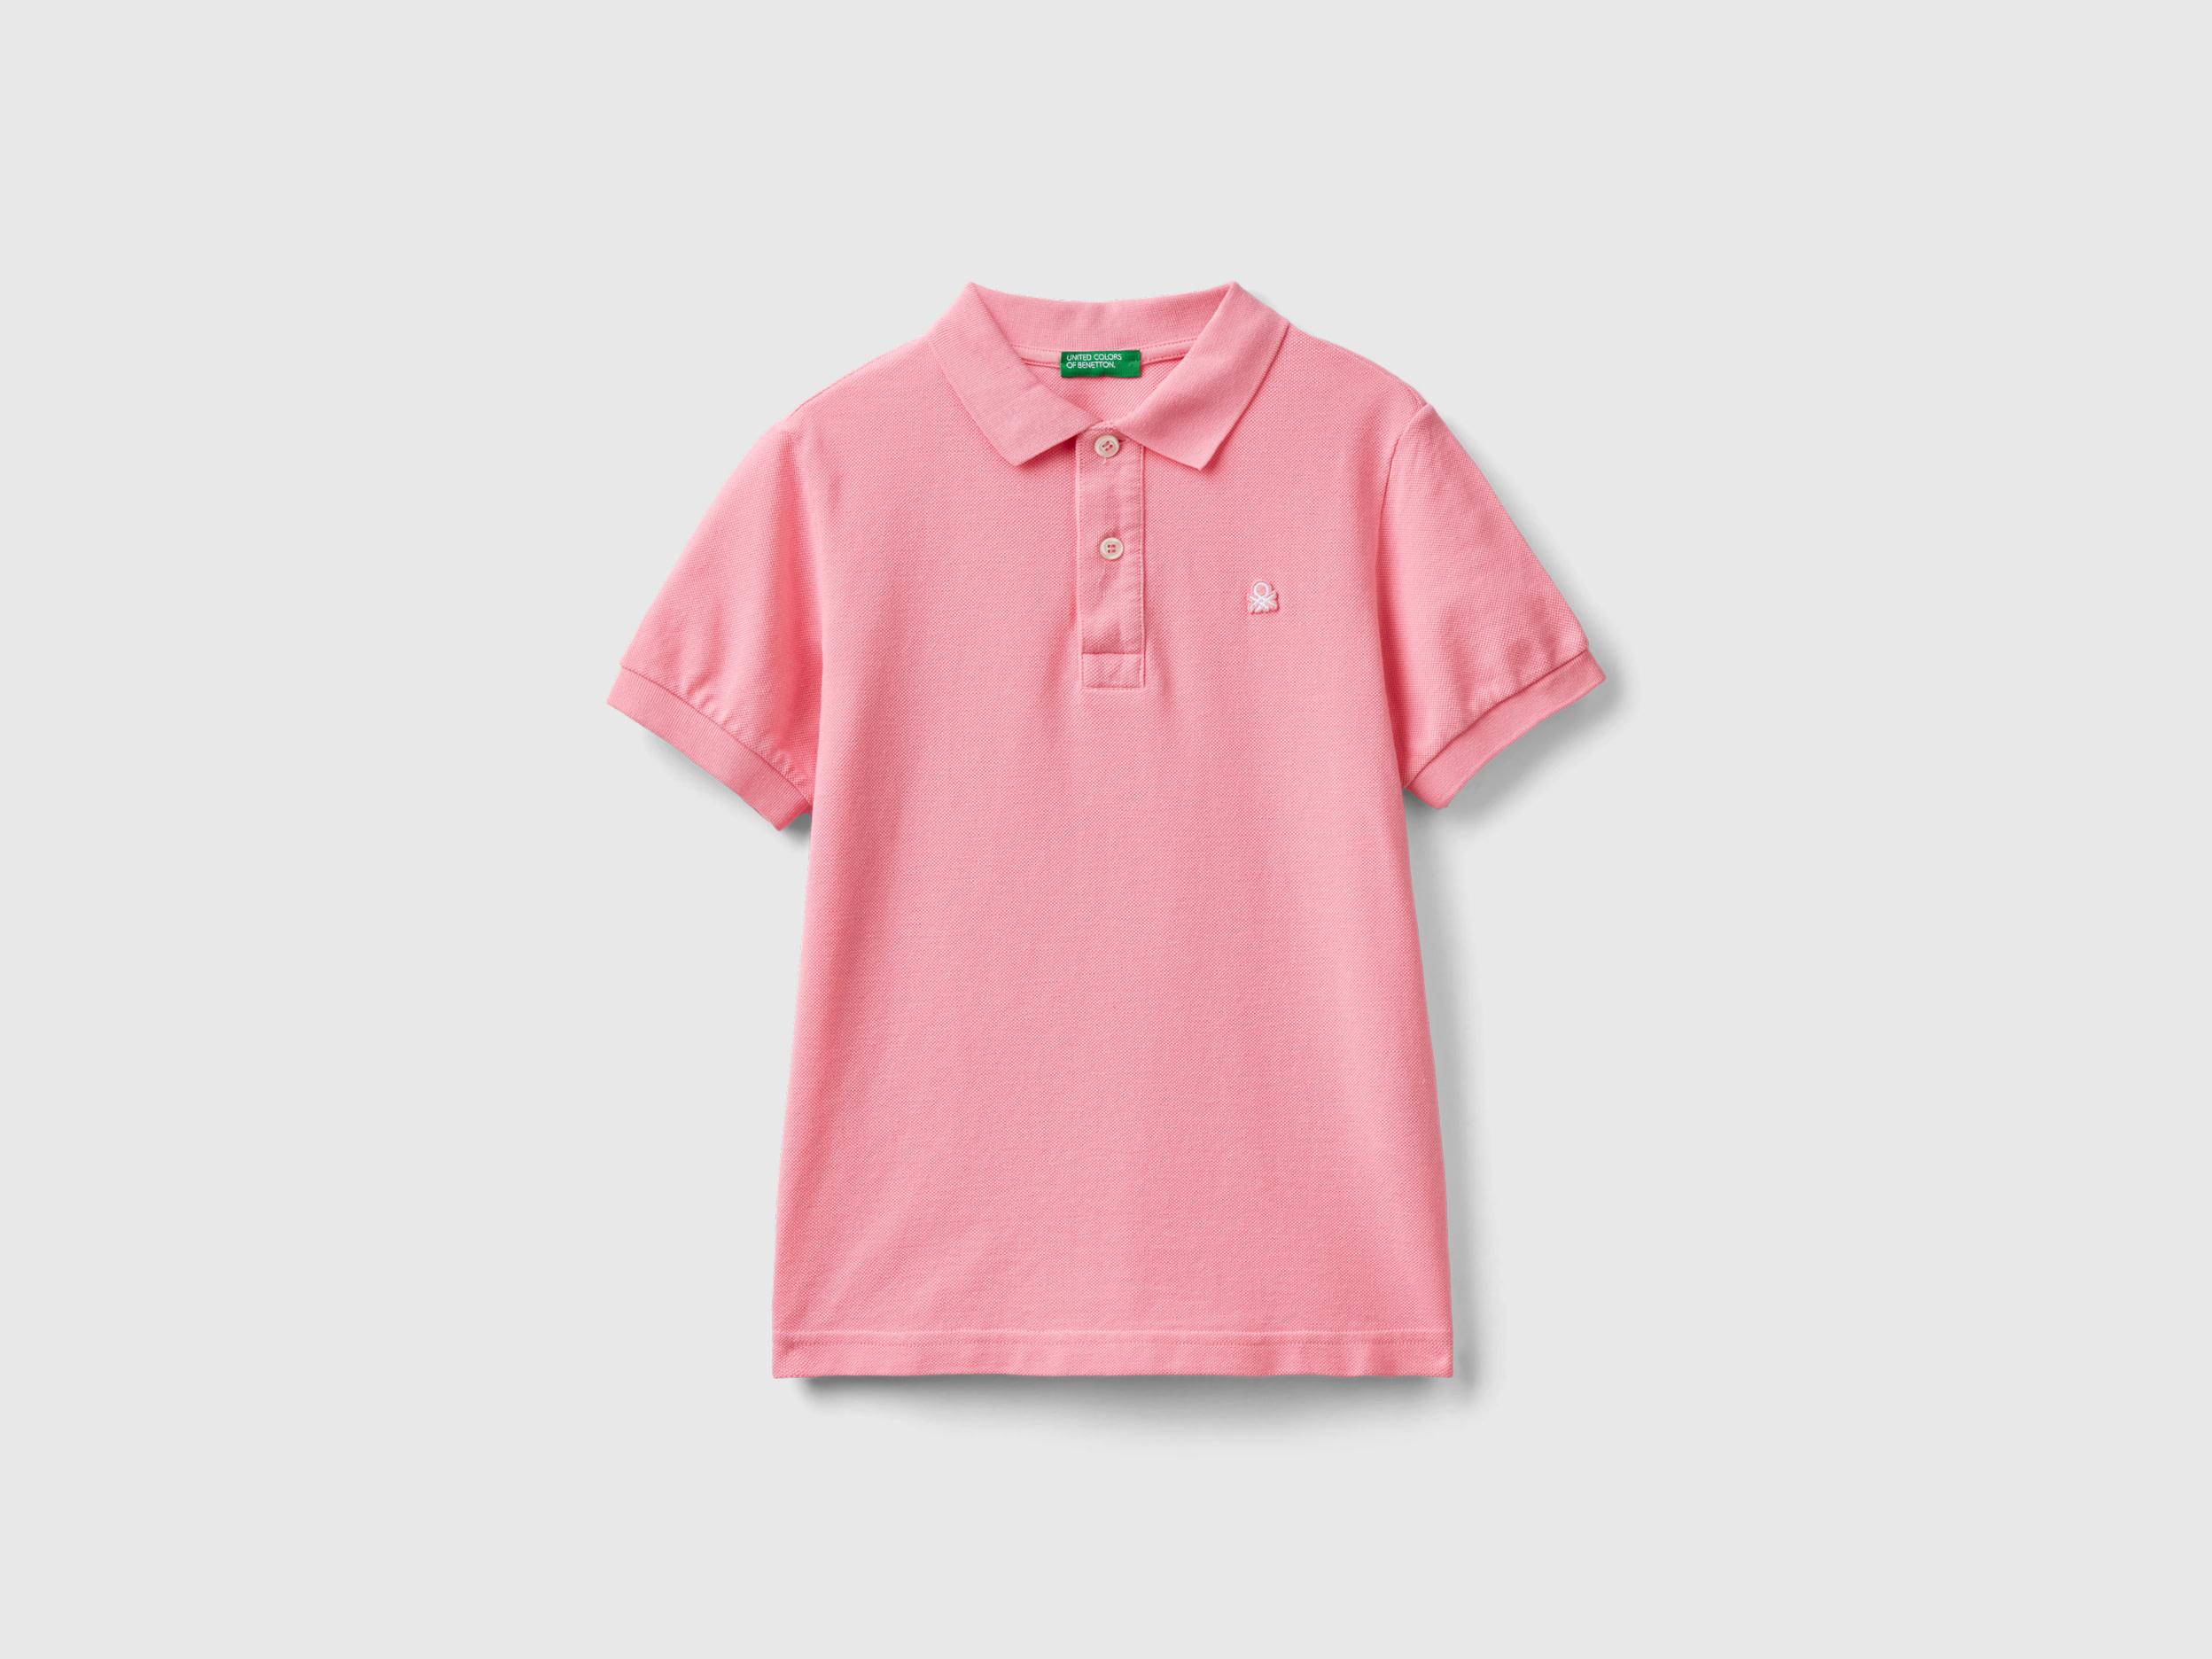 Image of Benetton, Slim Fit Polo In 100% Organic Cotton, size 2XL, Pink, Kids